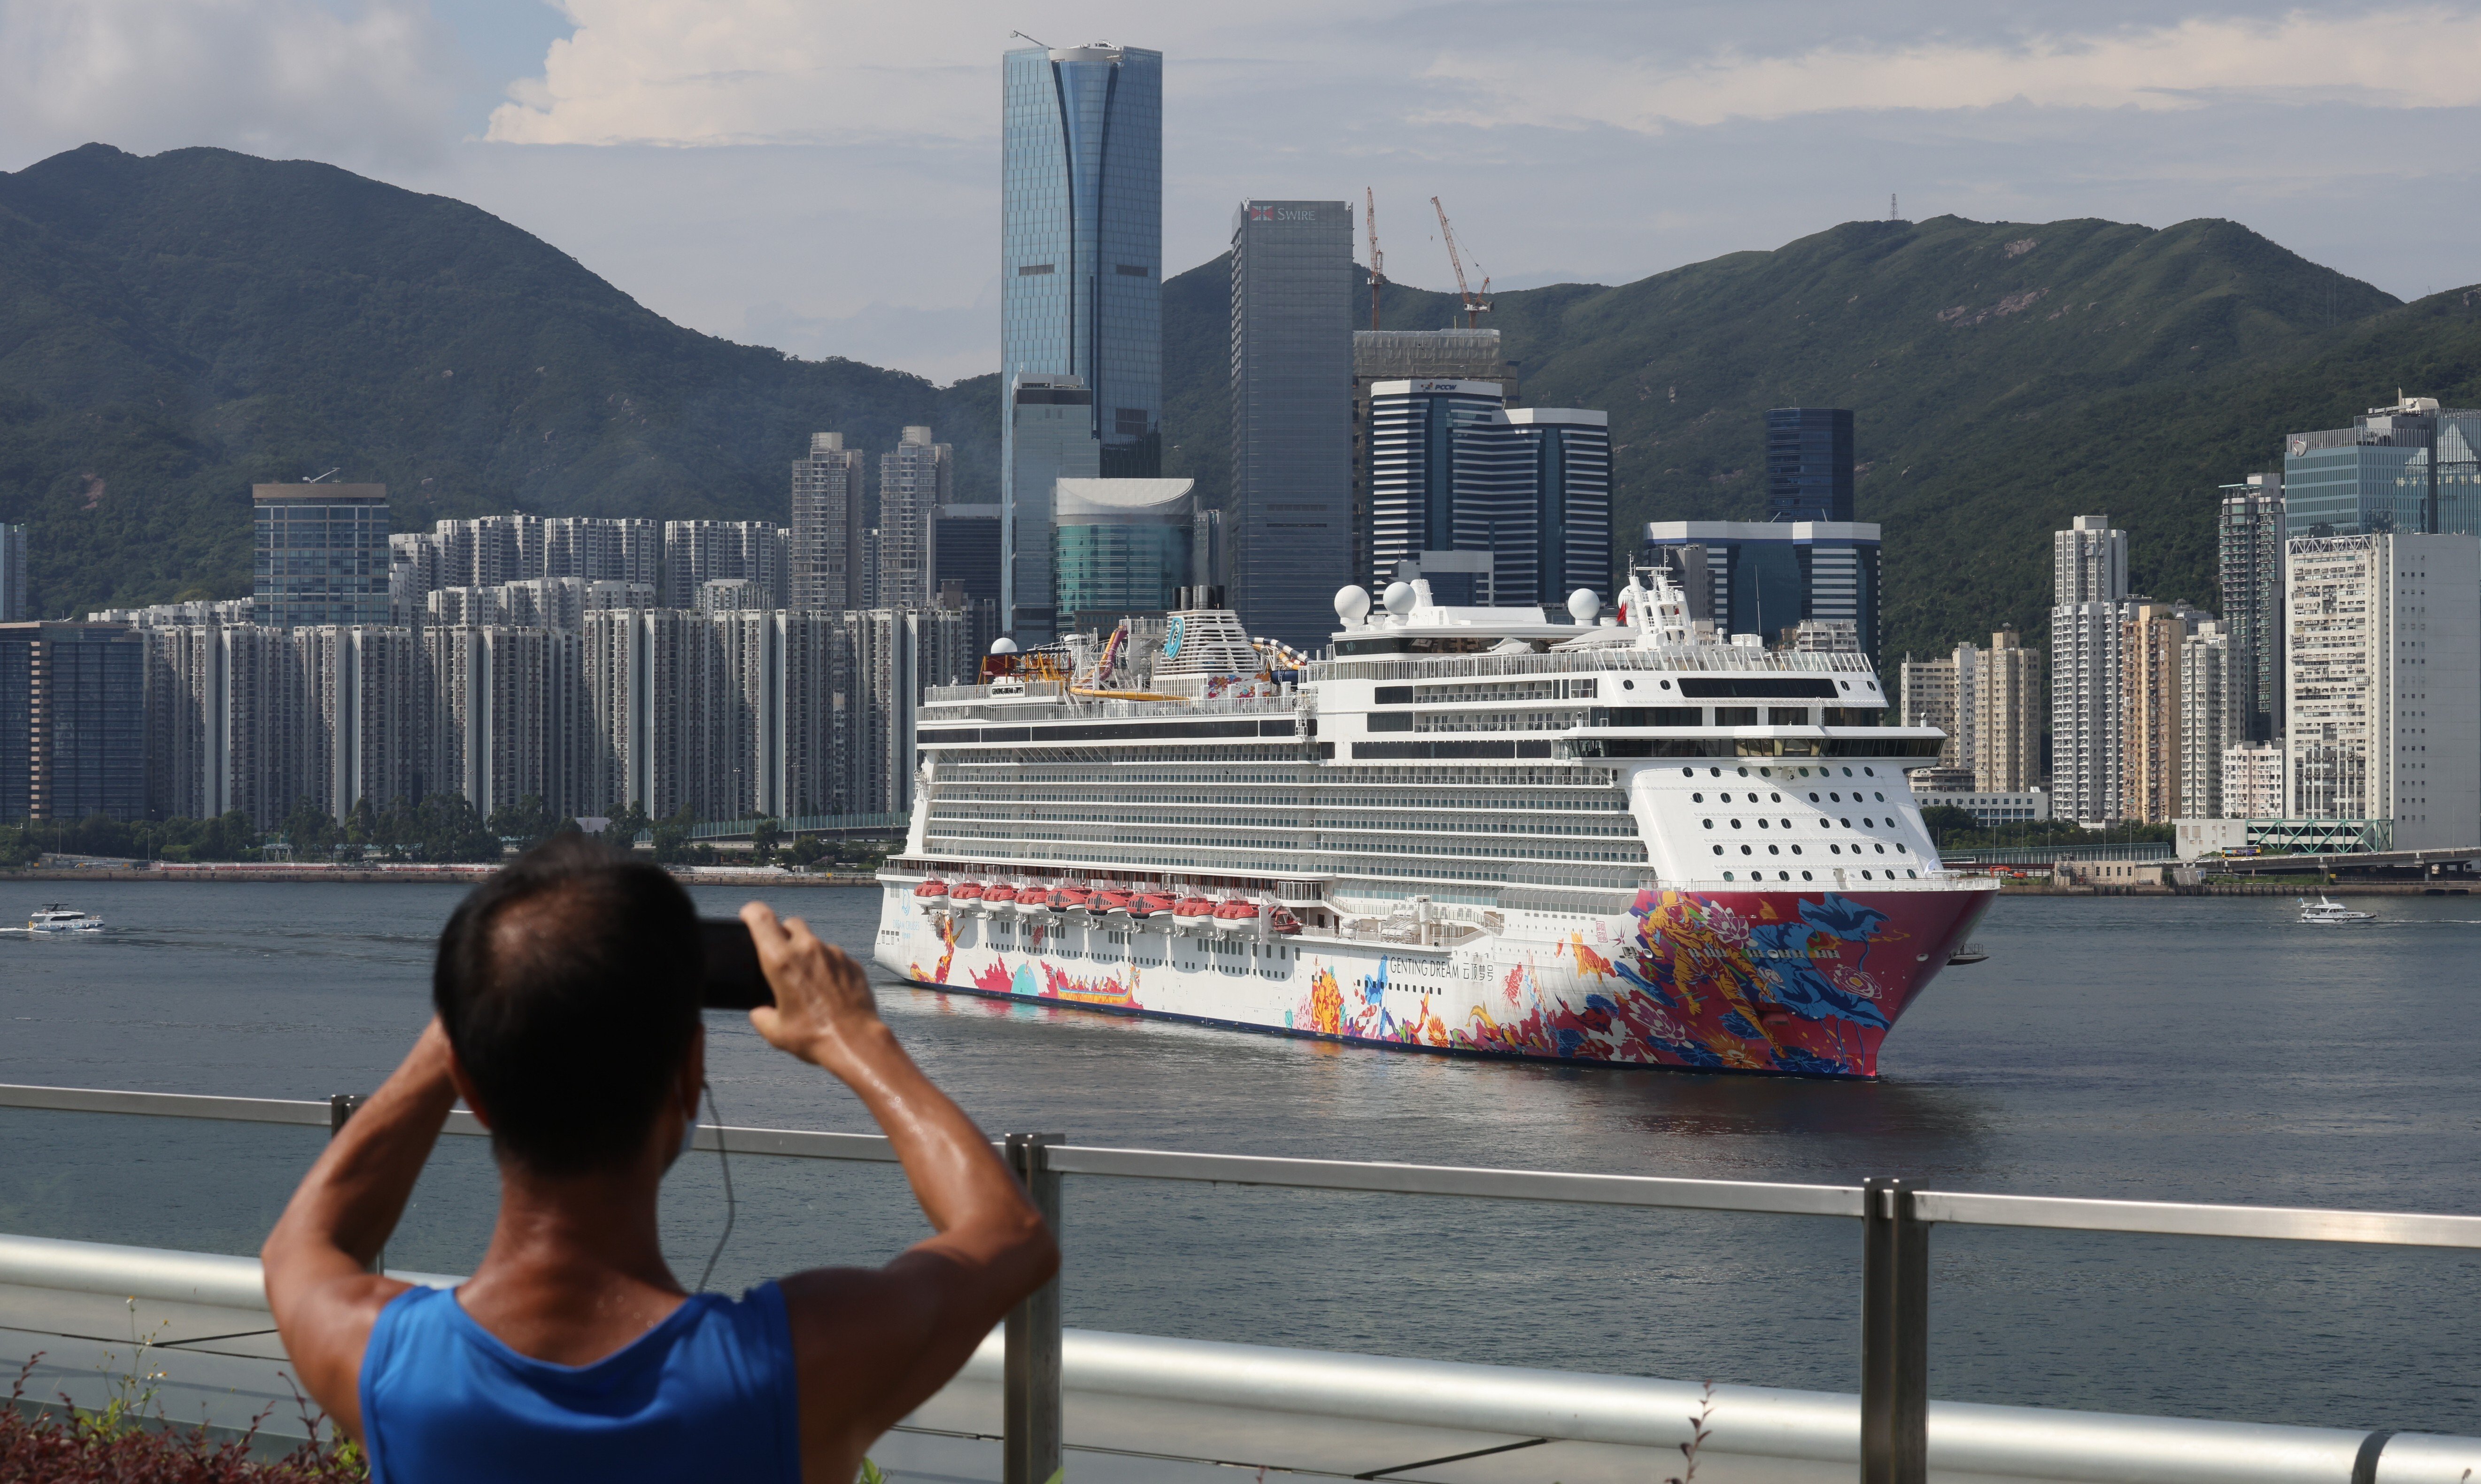 The Genting Dream cruise ship returns to Kai Tak Cruise Terminal with 1,070 passengers aboard having sailed the high seas for three days and two nights without stopping. Photo: Nora Tam